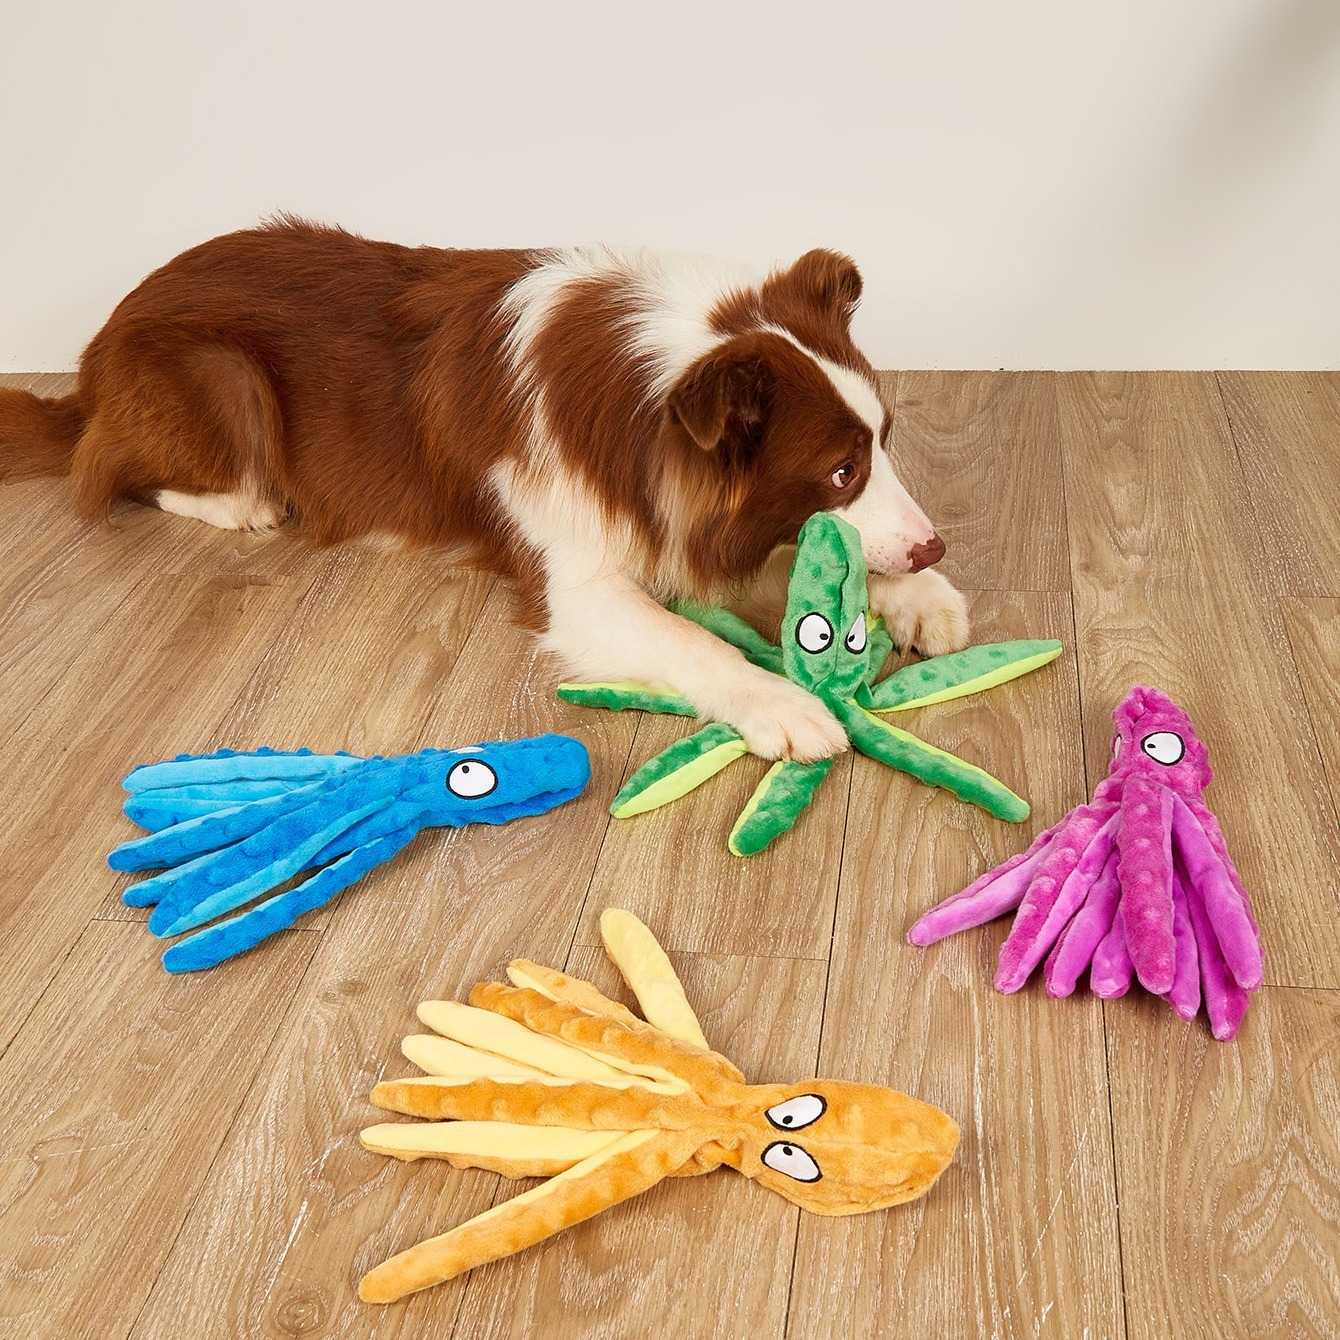 

Durable Plush Dog Toy For Aggressive Chewers - Interactive And Crinkly Pet Toy For Play And Tug Of War